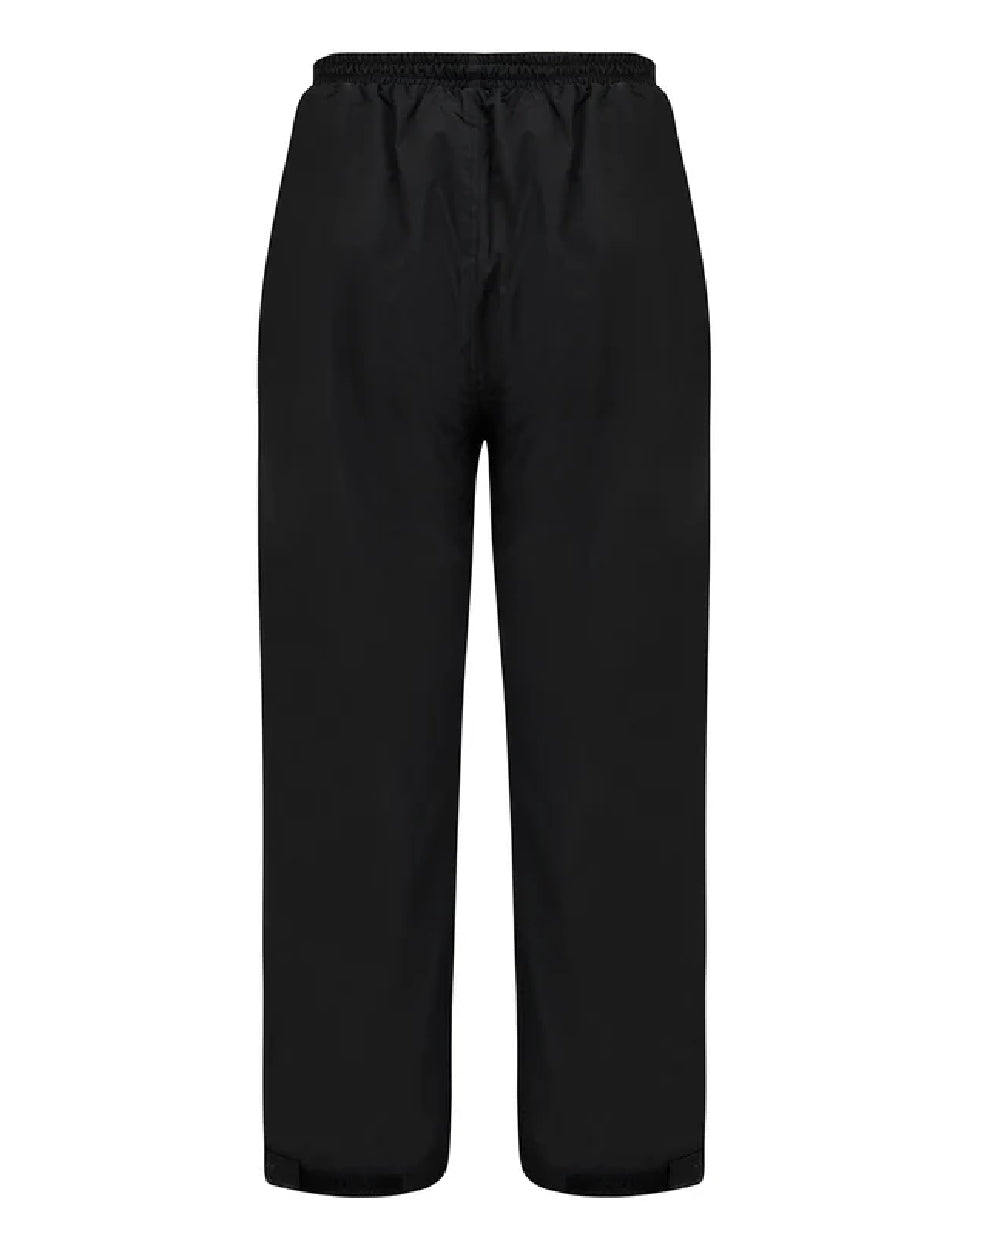 Liquorice coloured Mac In A Sac Explorer Mens Waterproof Overtrousers on white background 